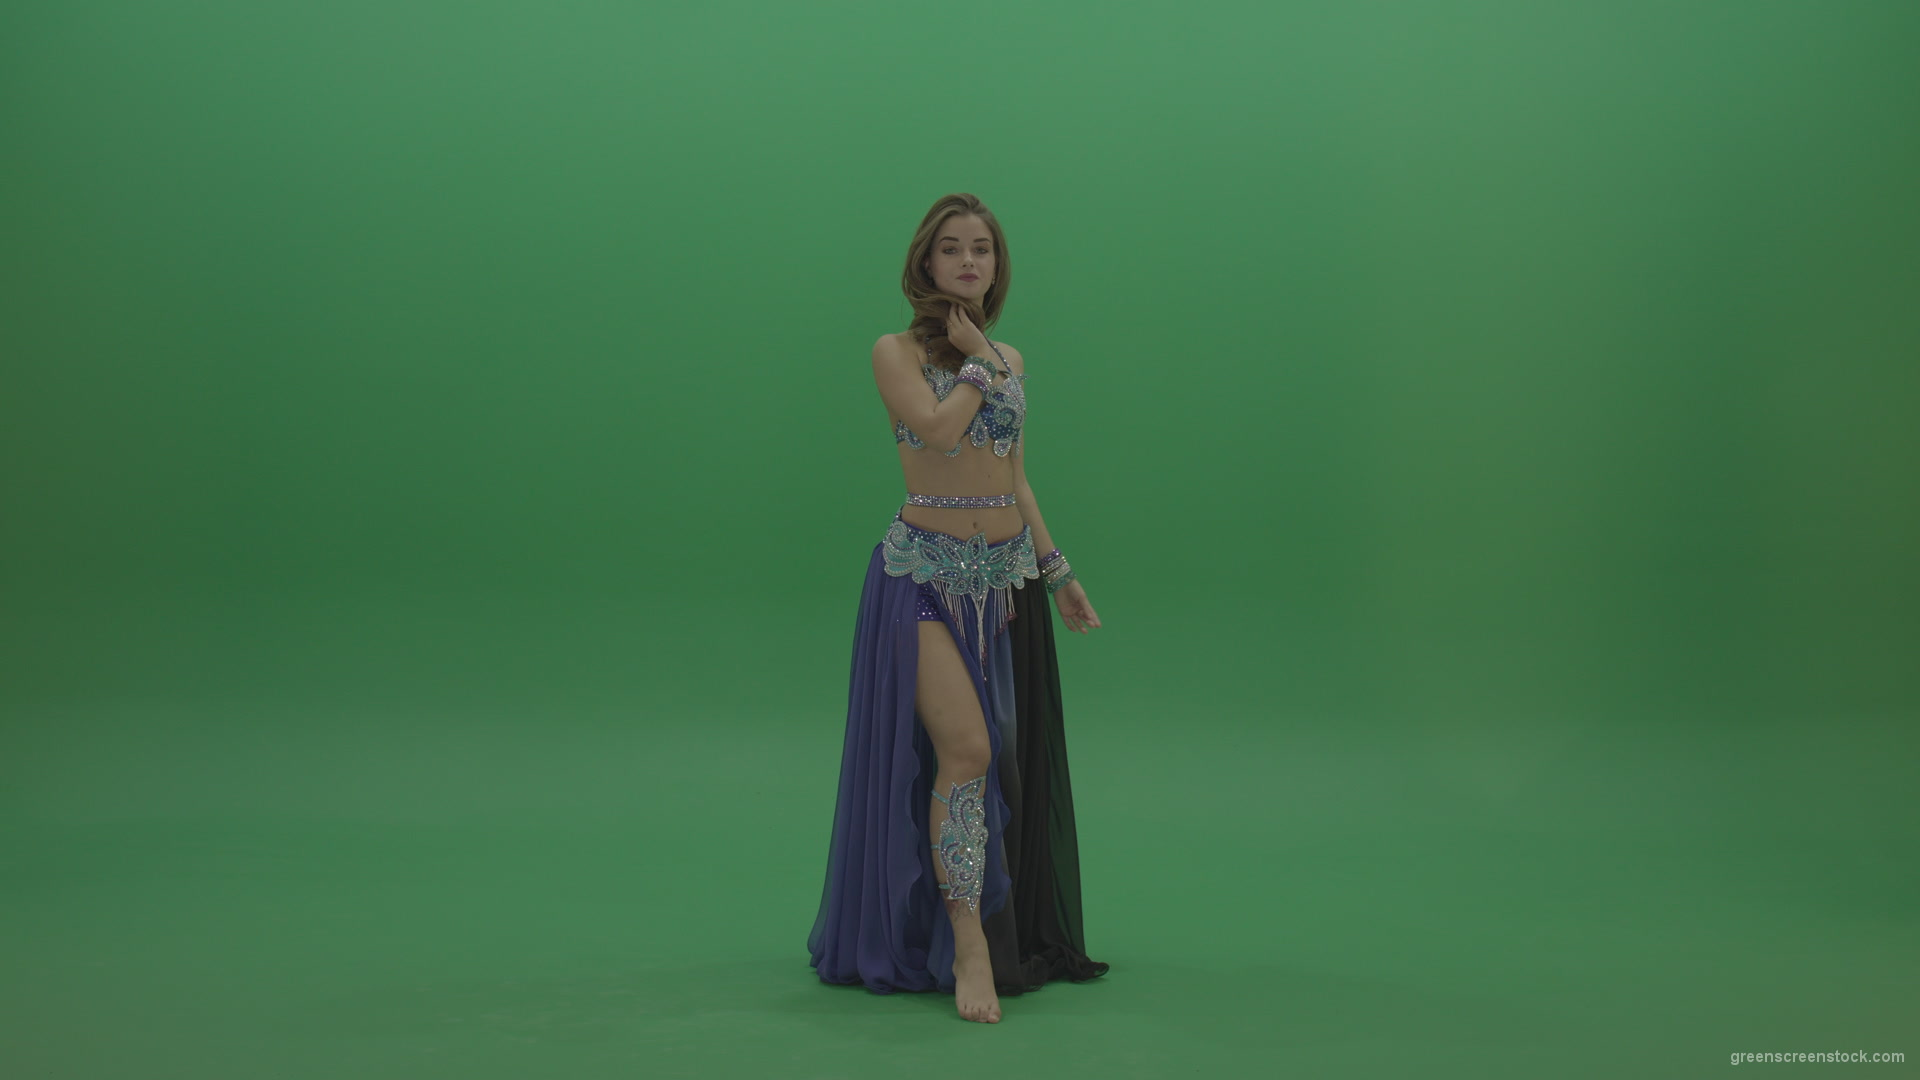 Foxy-belly-dancer-in-purple-and-black-wear-display-amazing-dance-moves-over-chromakey-background_001 Green Screen Stock